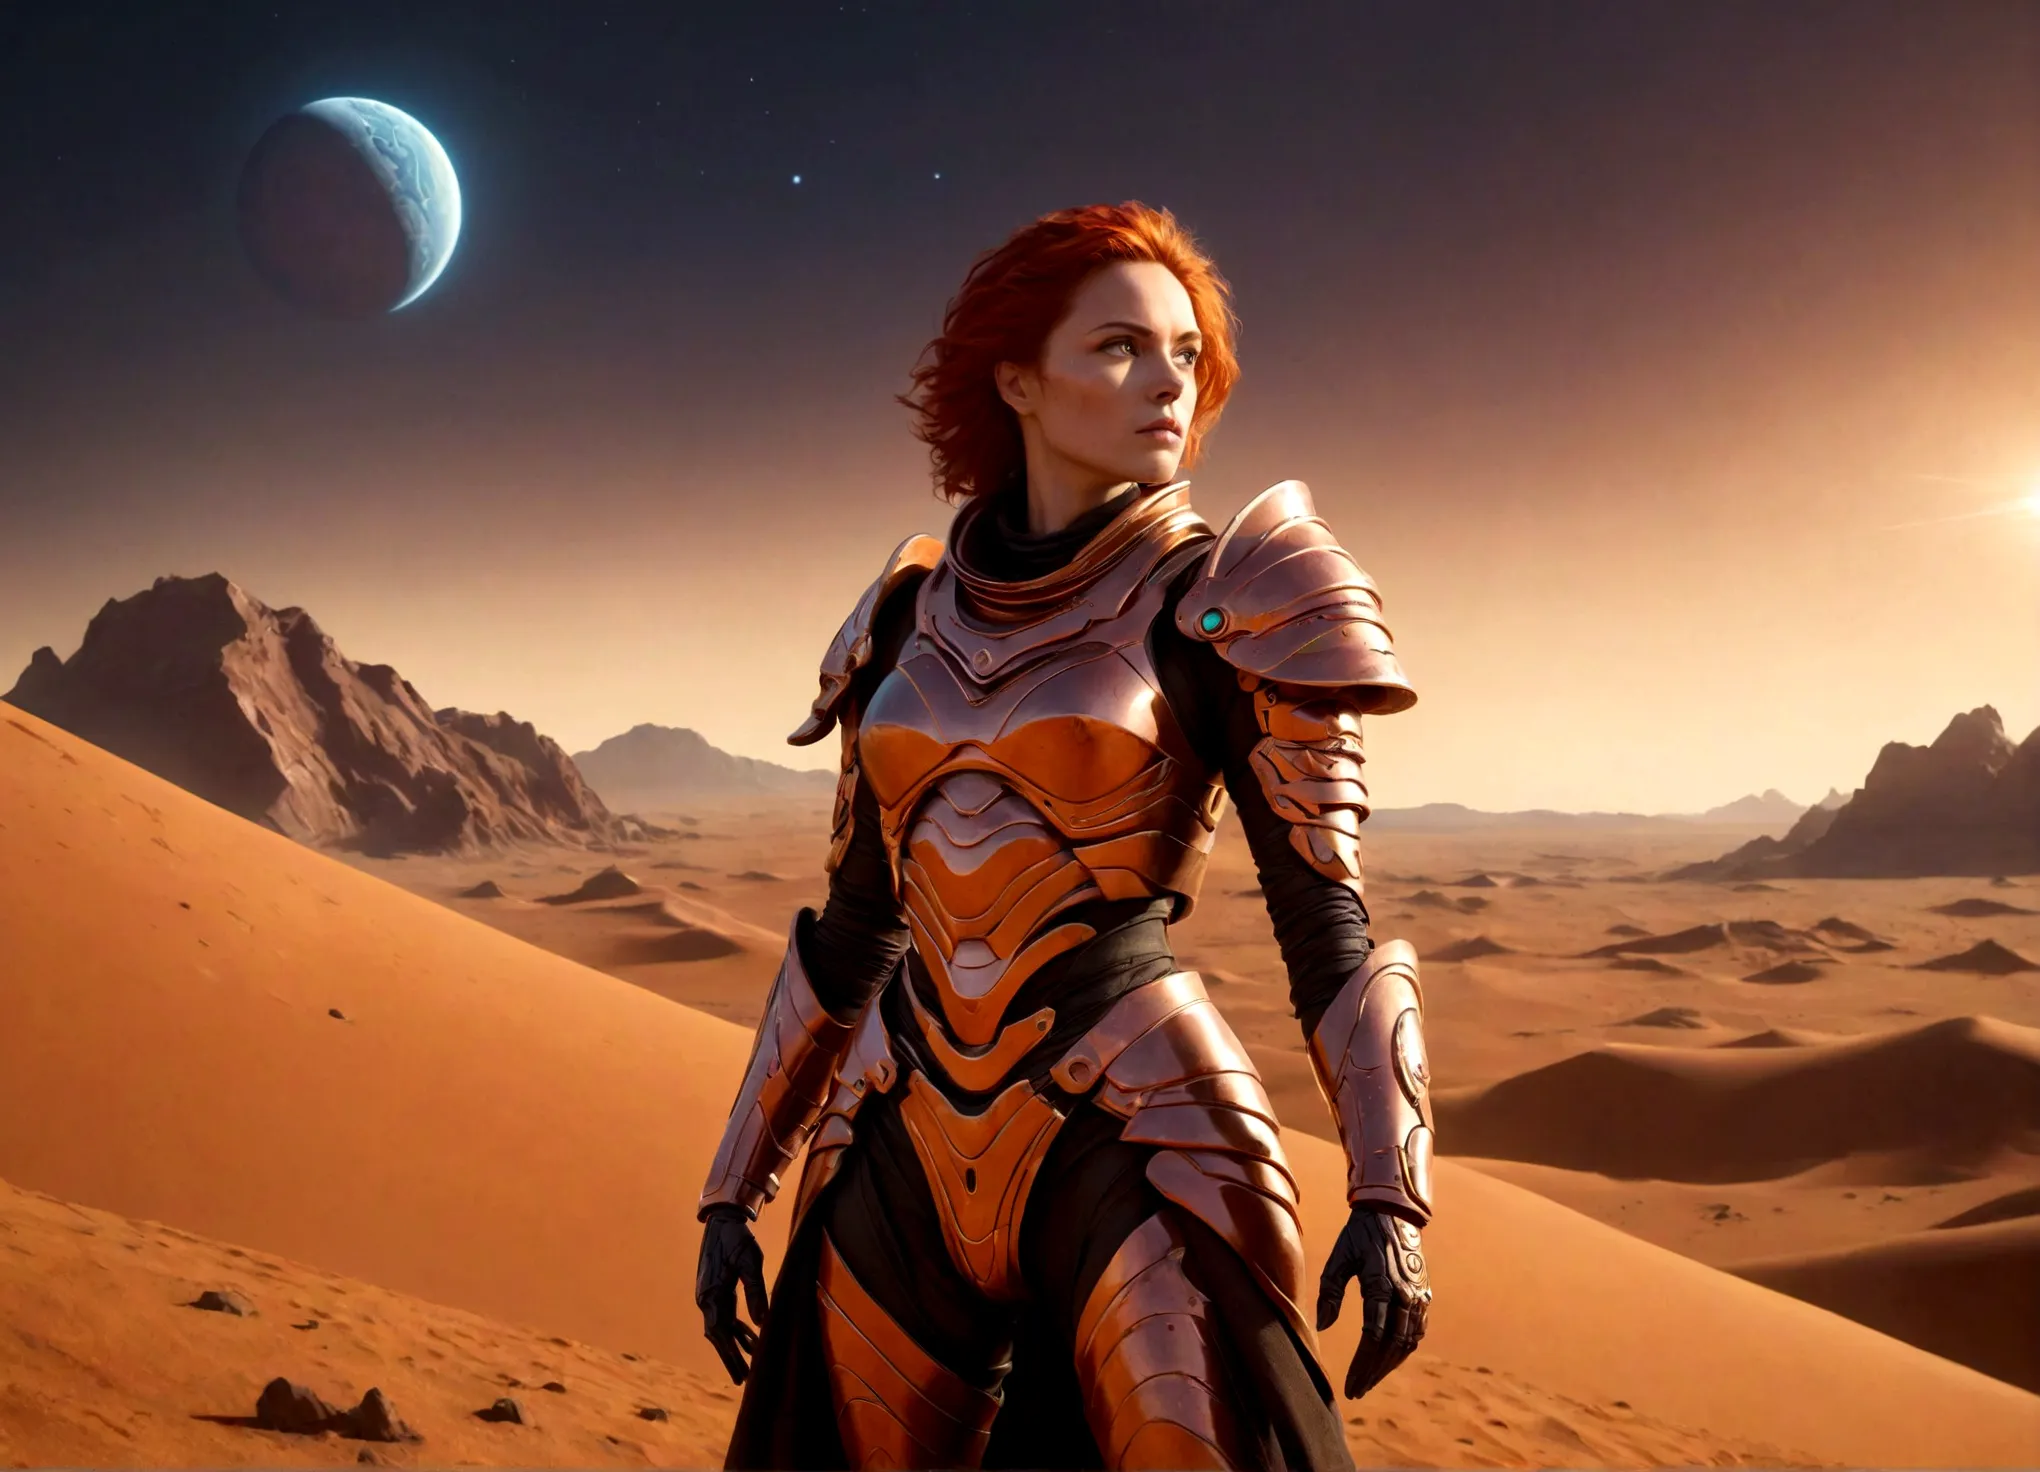 a warrior queen on Mars, Dune-style, highly detailed armor, futuristic Martian landscape, dramatic lighting, cinematic compositi...